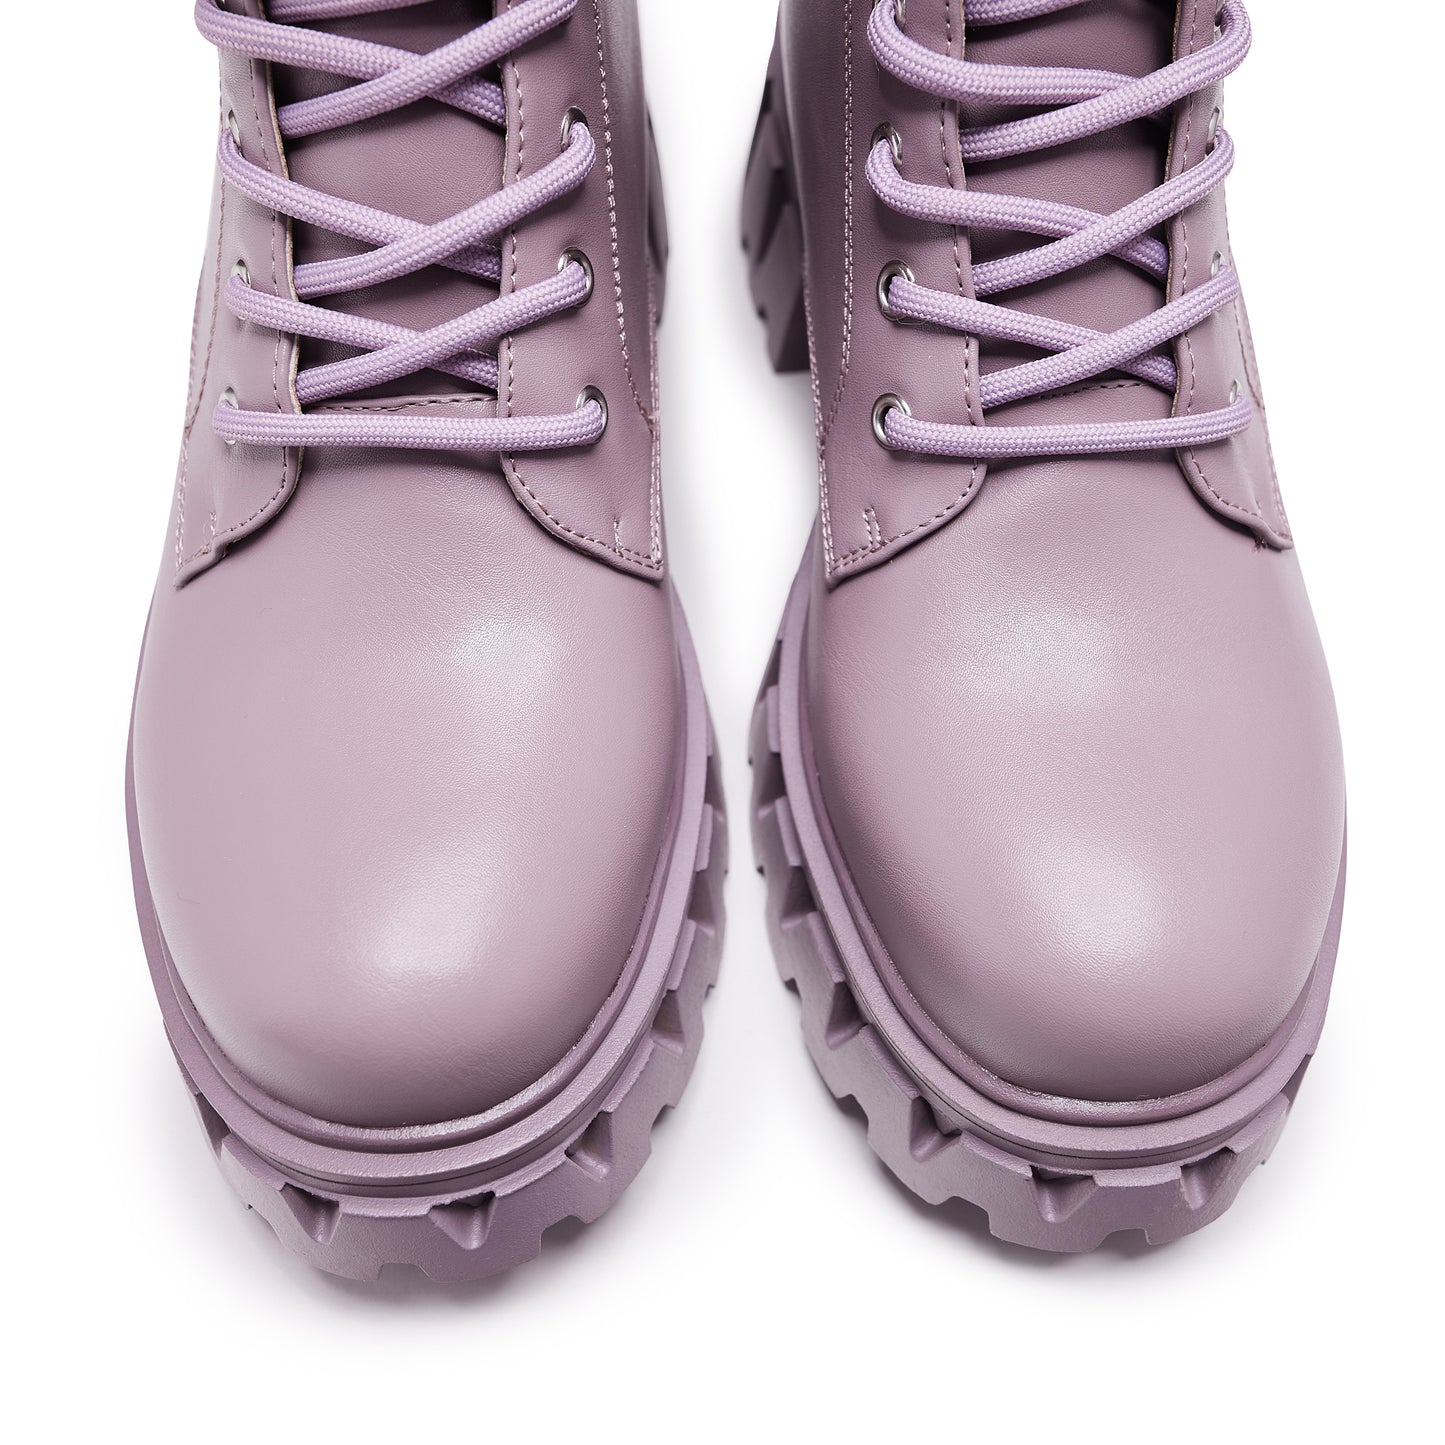 Siren Tall Lace Up Boots - Berry - Ankle Boots - KOI Footwear - Purple - Top View